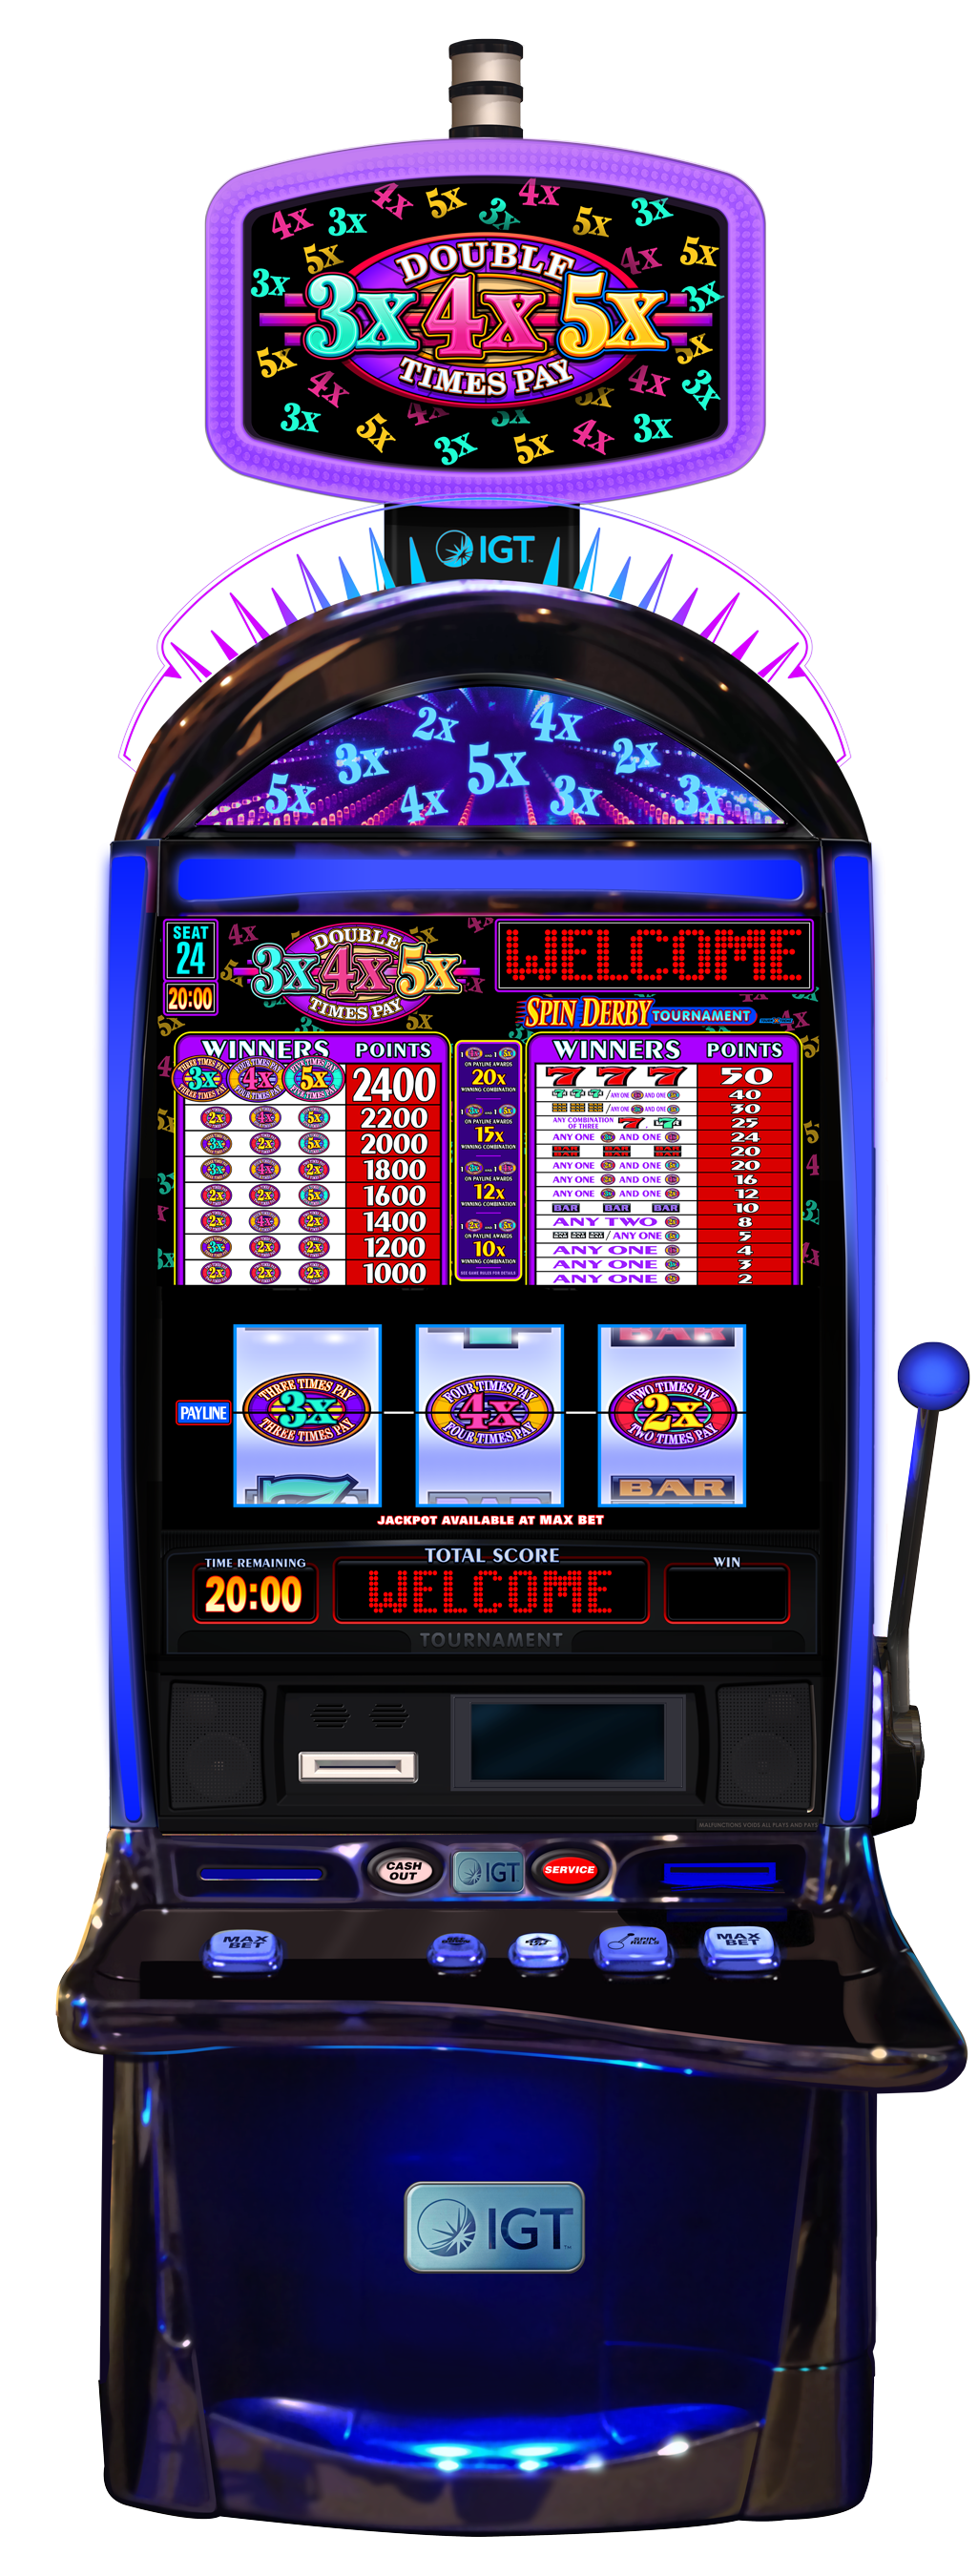 IGT's S3000 stepper slot machine featuring IGT's Spin Derby Slot Tournament using IGT's Tournxtreme tournament manager system.